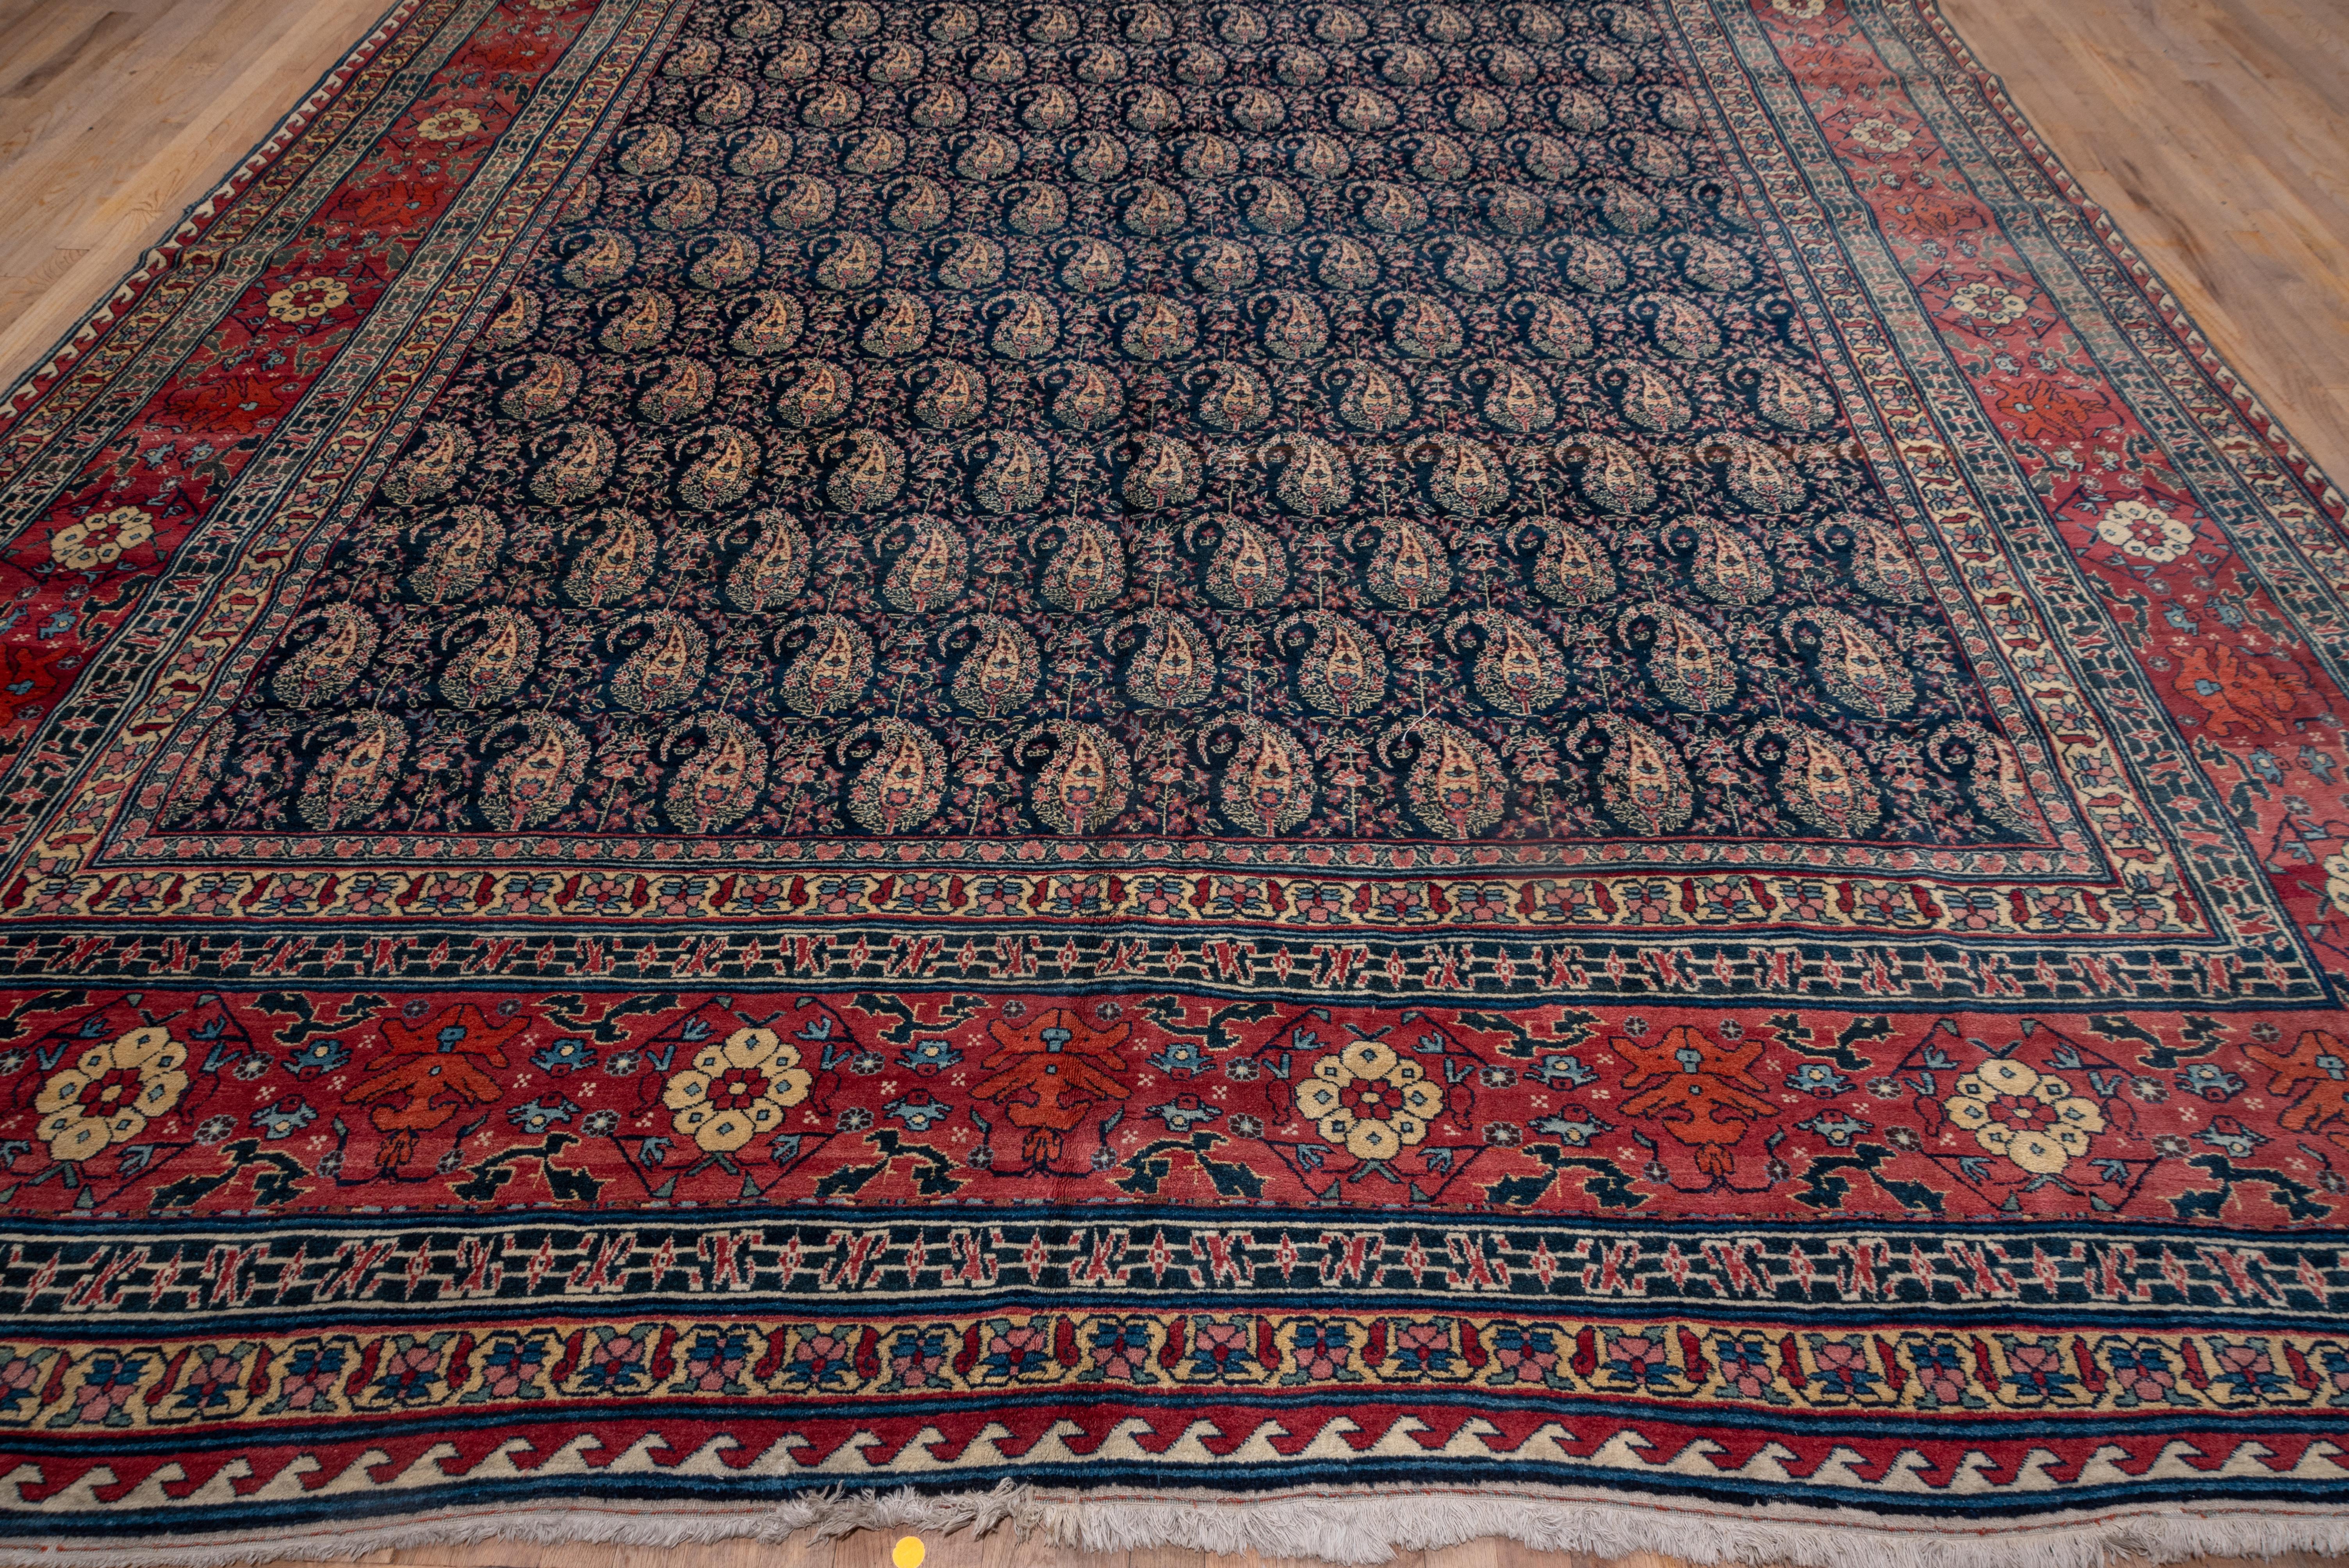 Here is a fine condition NW Persian well-woven city carpet with an eclectic design selection. The red main border relates to Bakhtiari carpets while the minors are in the Kurdish Suj-Bulak style. The navy field features half-drop rows of floriated